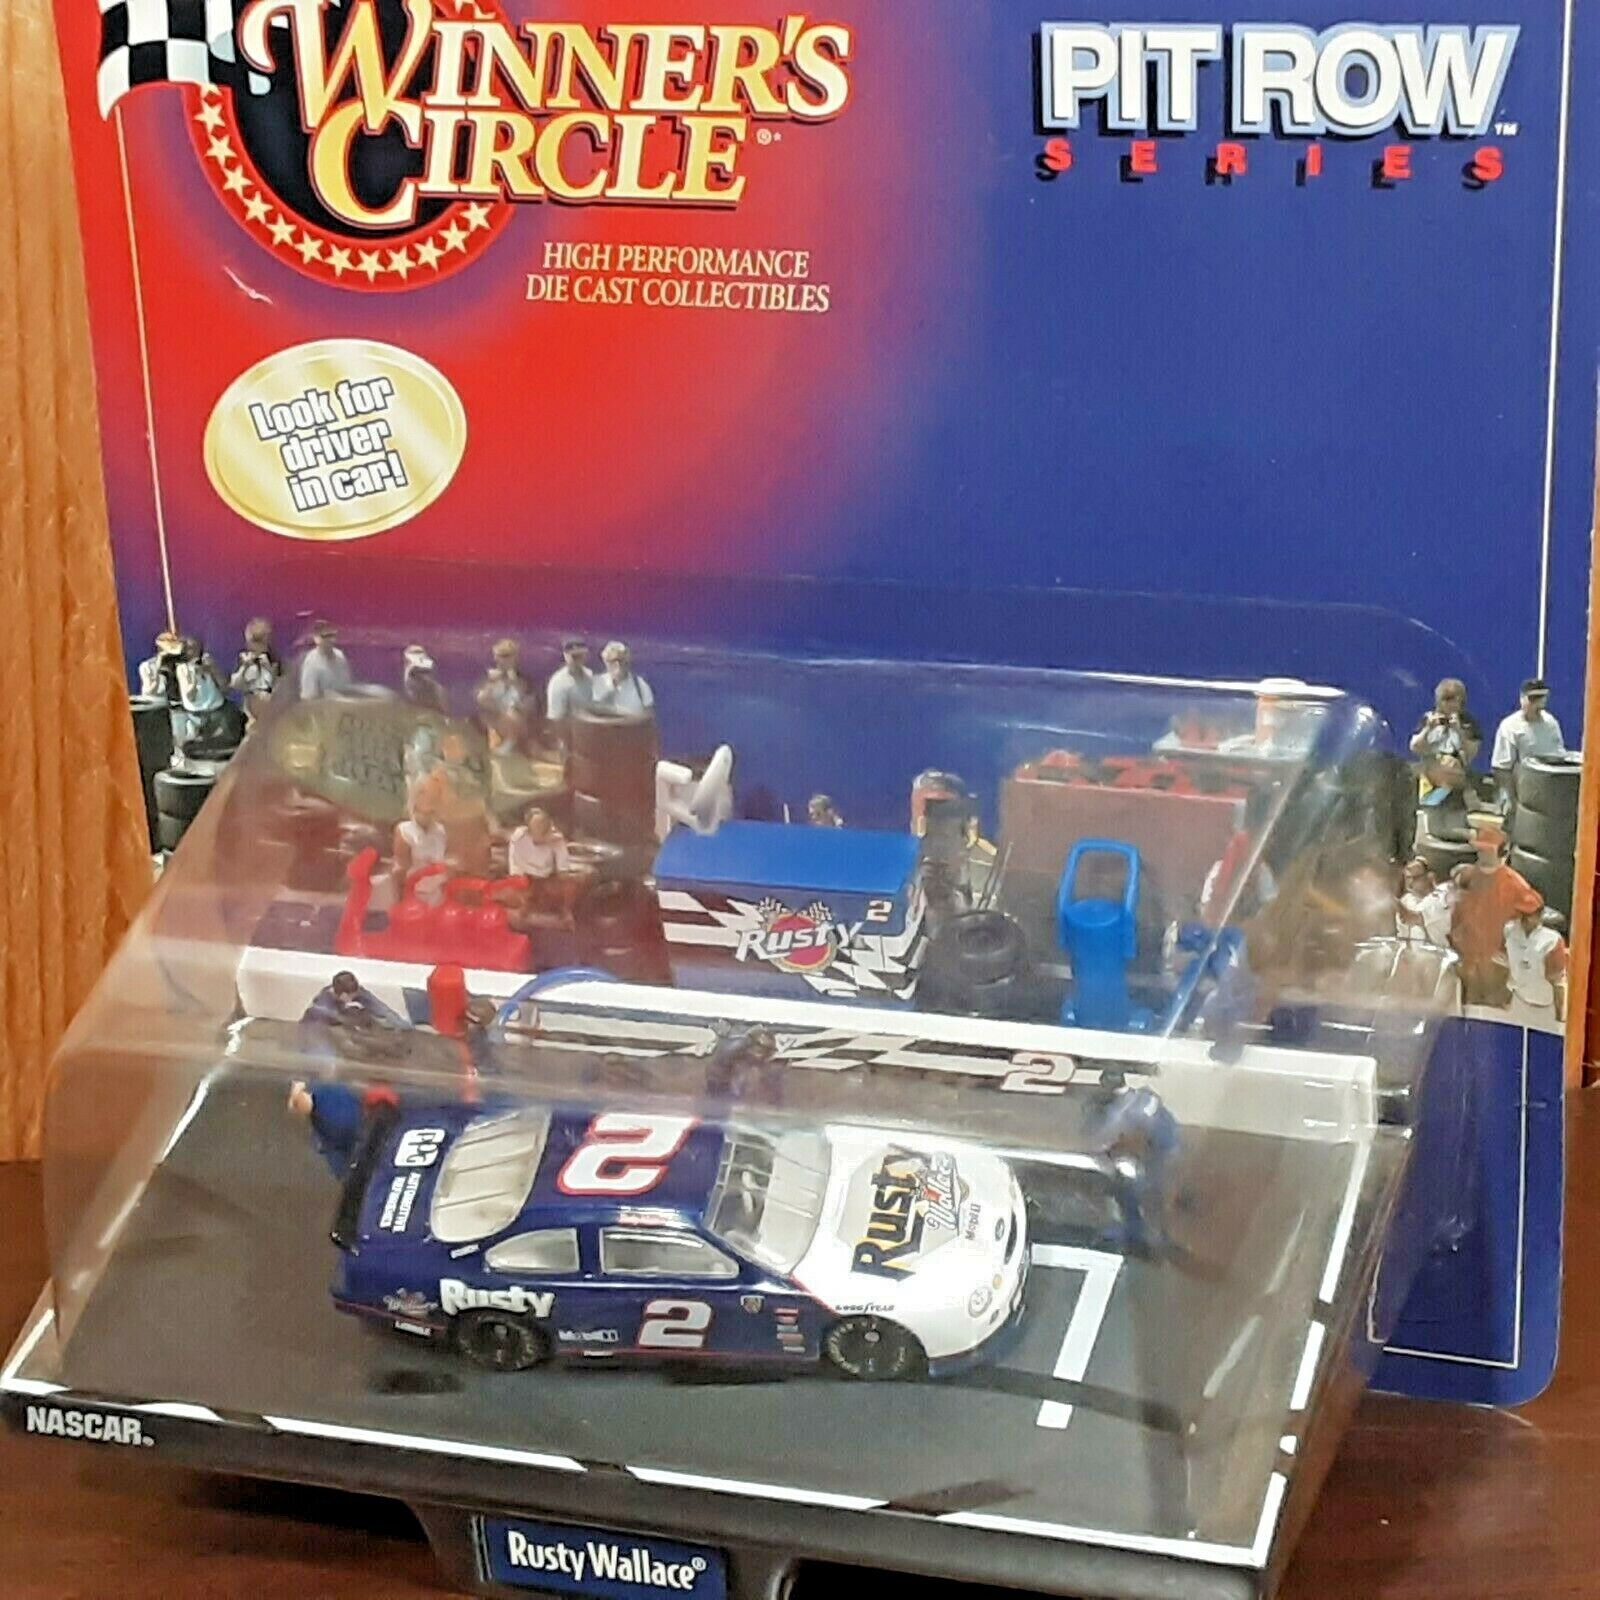 Rusty Wallace #2 Miller Lite Ford Taurus Pit Row Series 1:64 Diecast NASCAR 